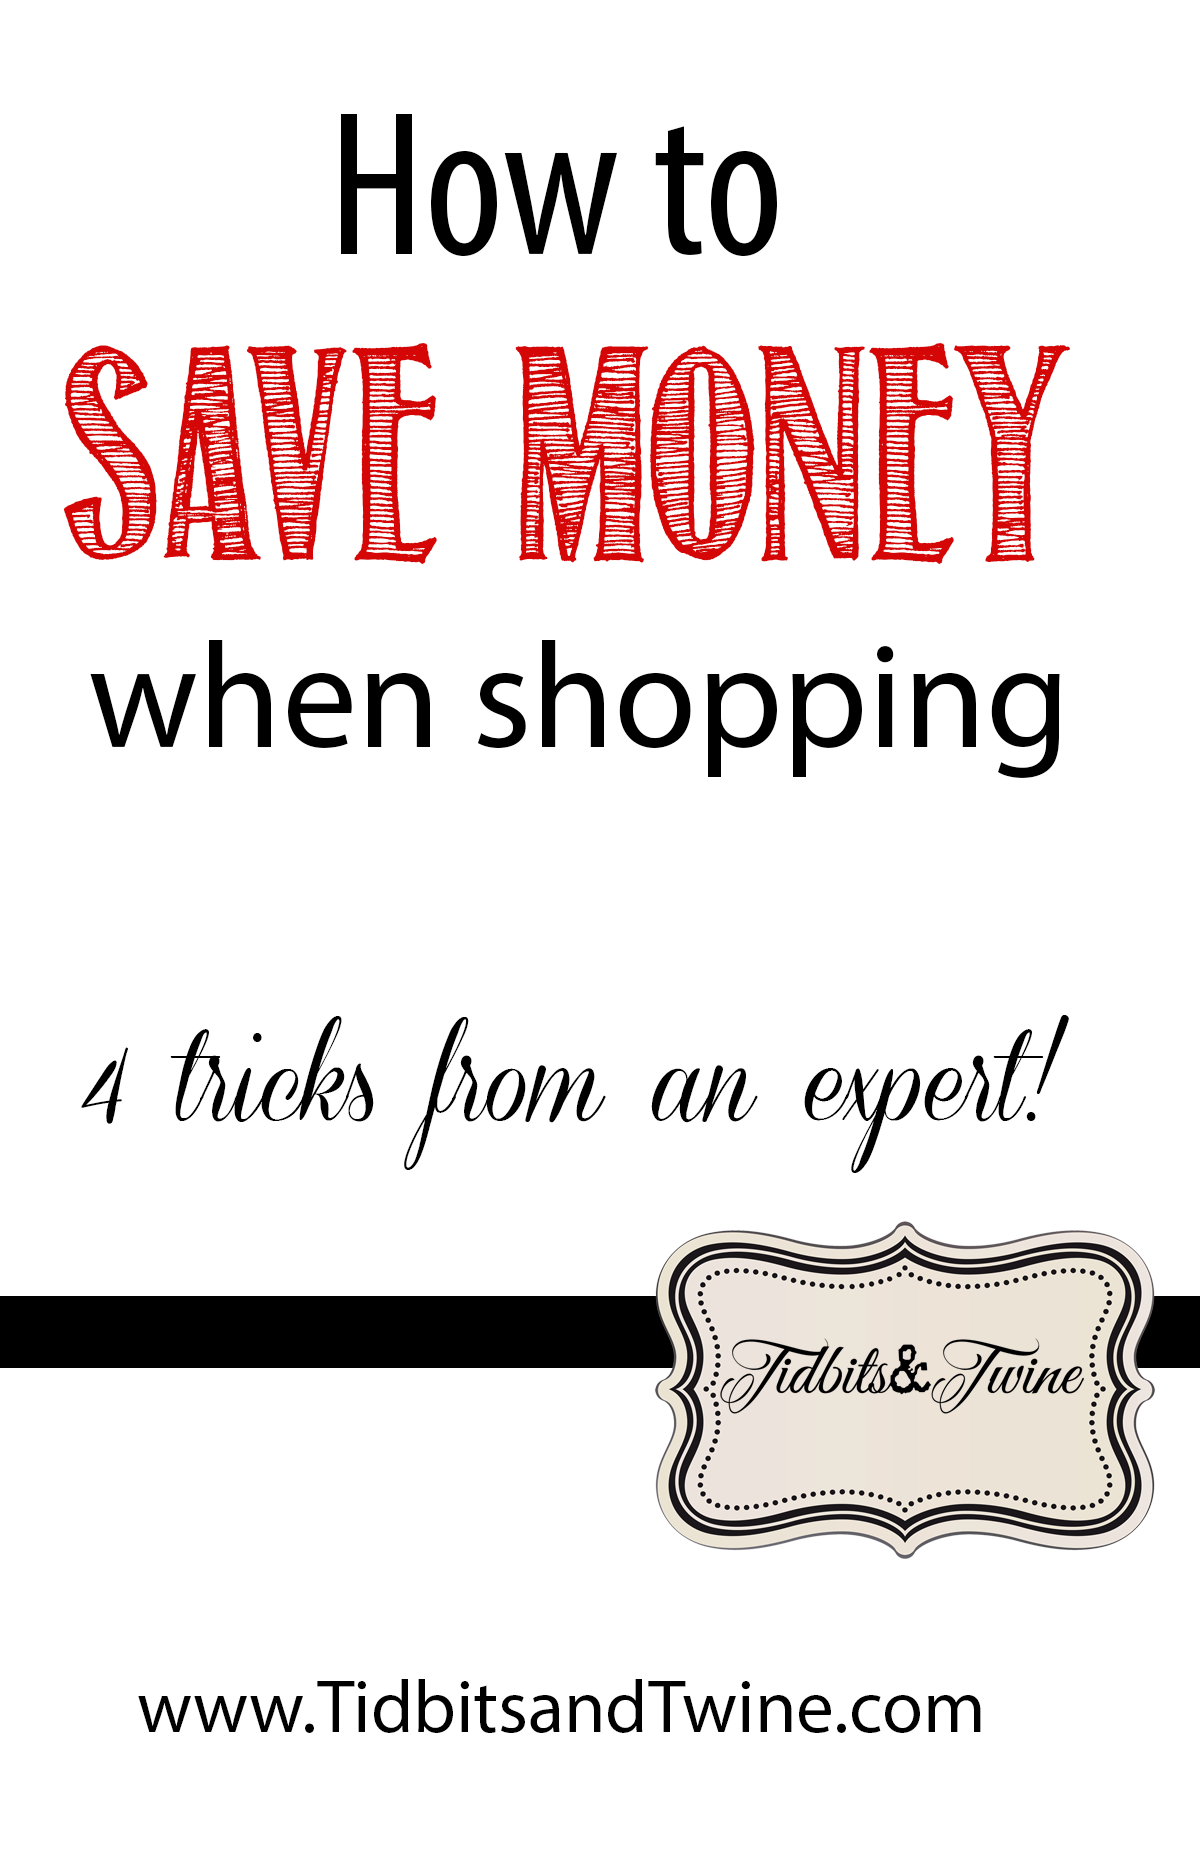 TIDBITS&TWINE 4 Tips to Save Money When Shopping